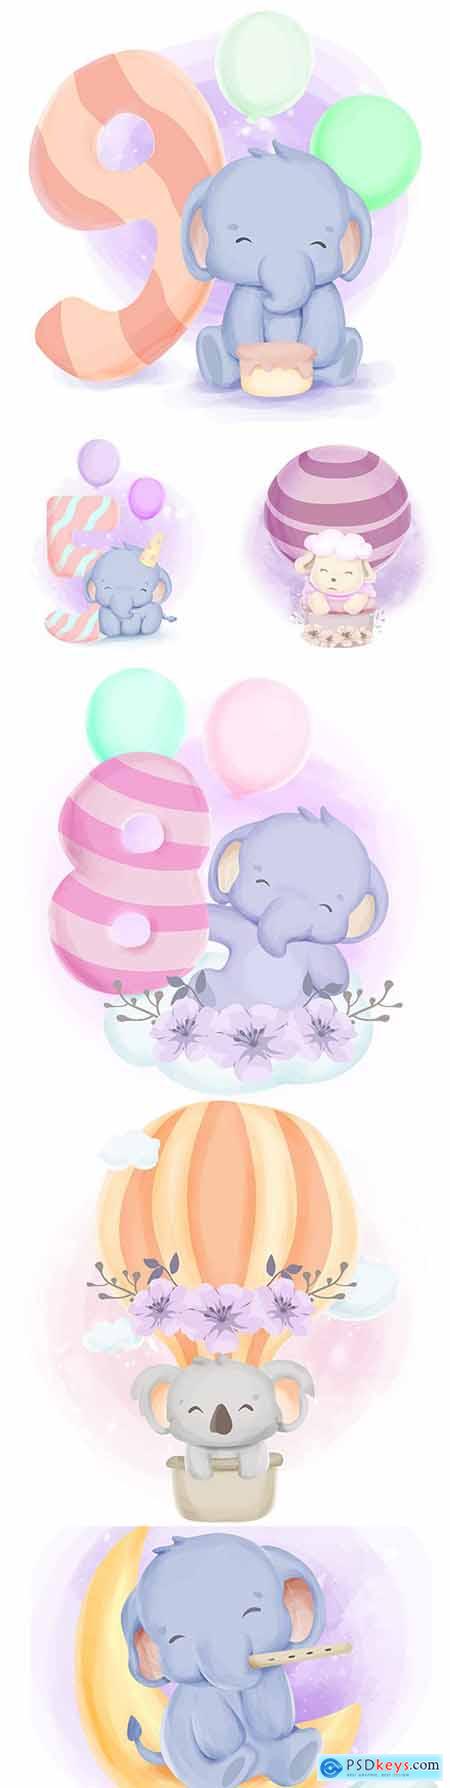 Cute elephant with balls and numbers watercolor illustration